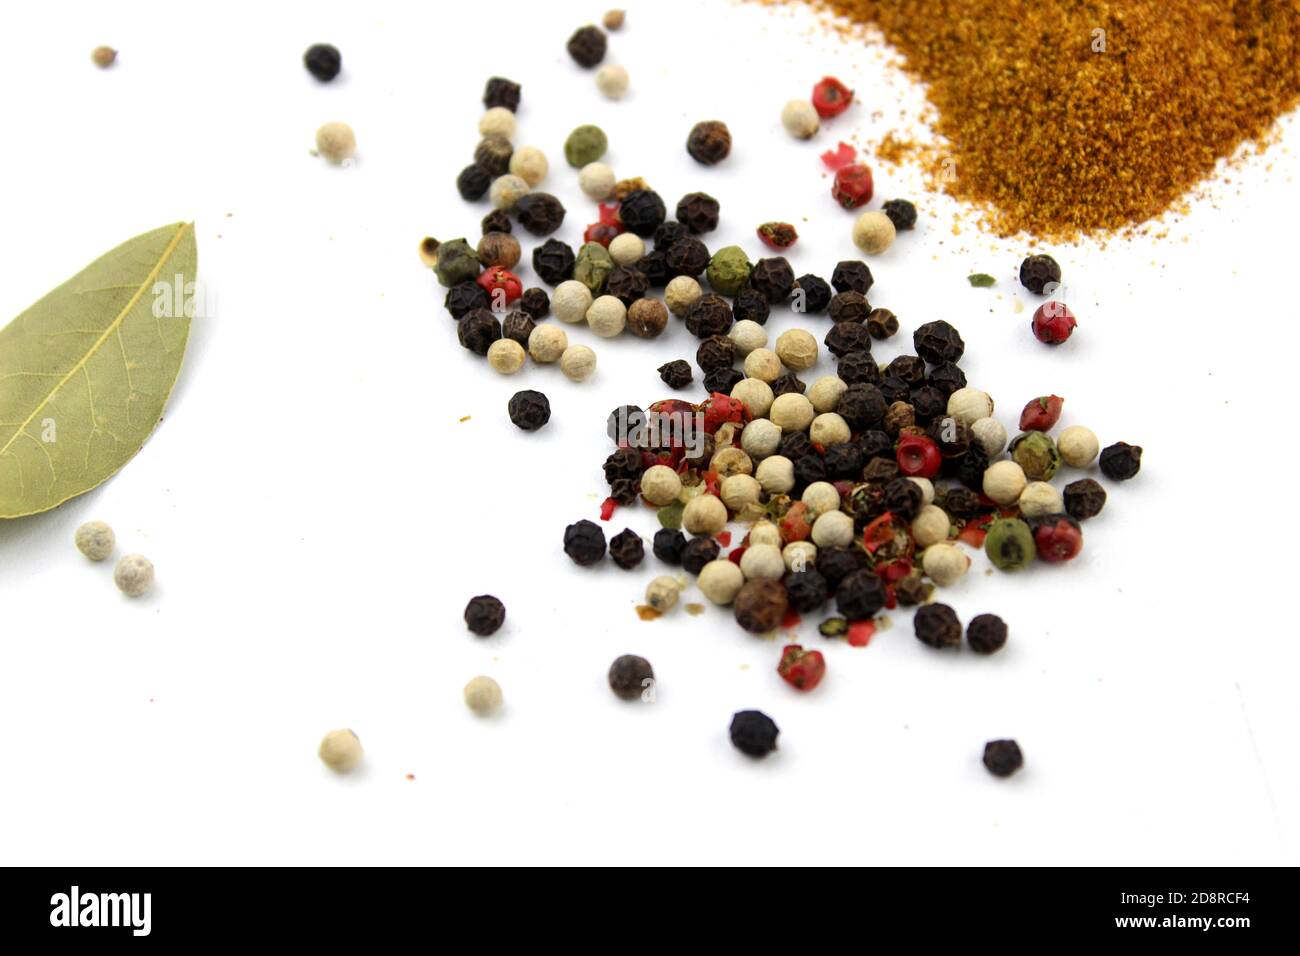 Wide variety spices and herbs on background of white table, with empty space for text or label Stock Photo